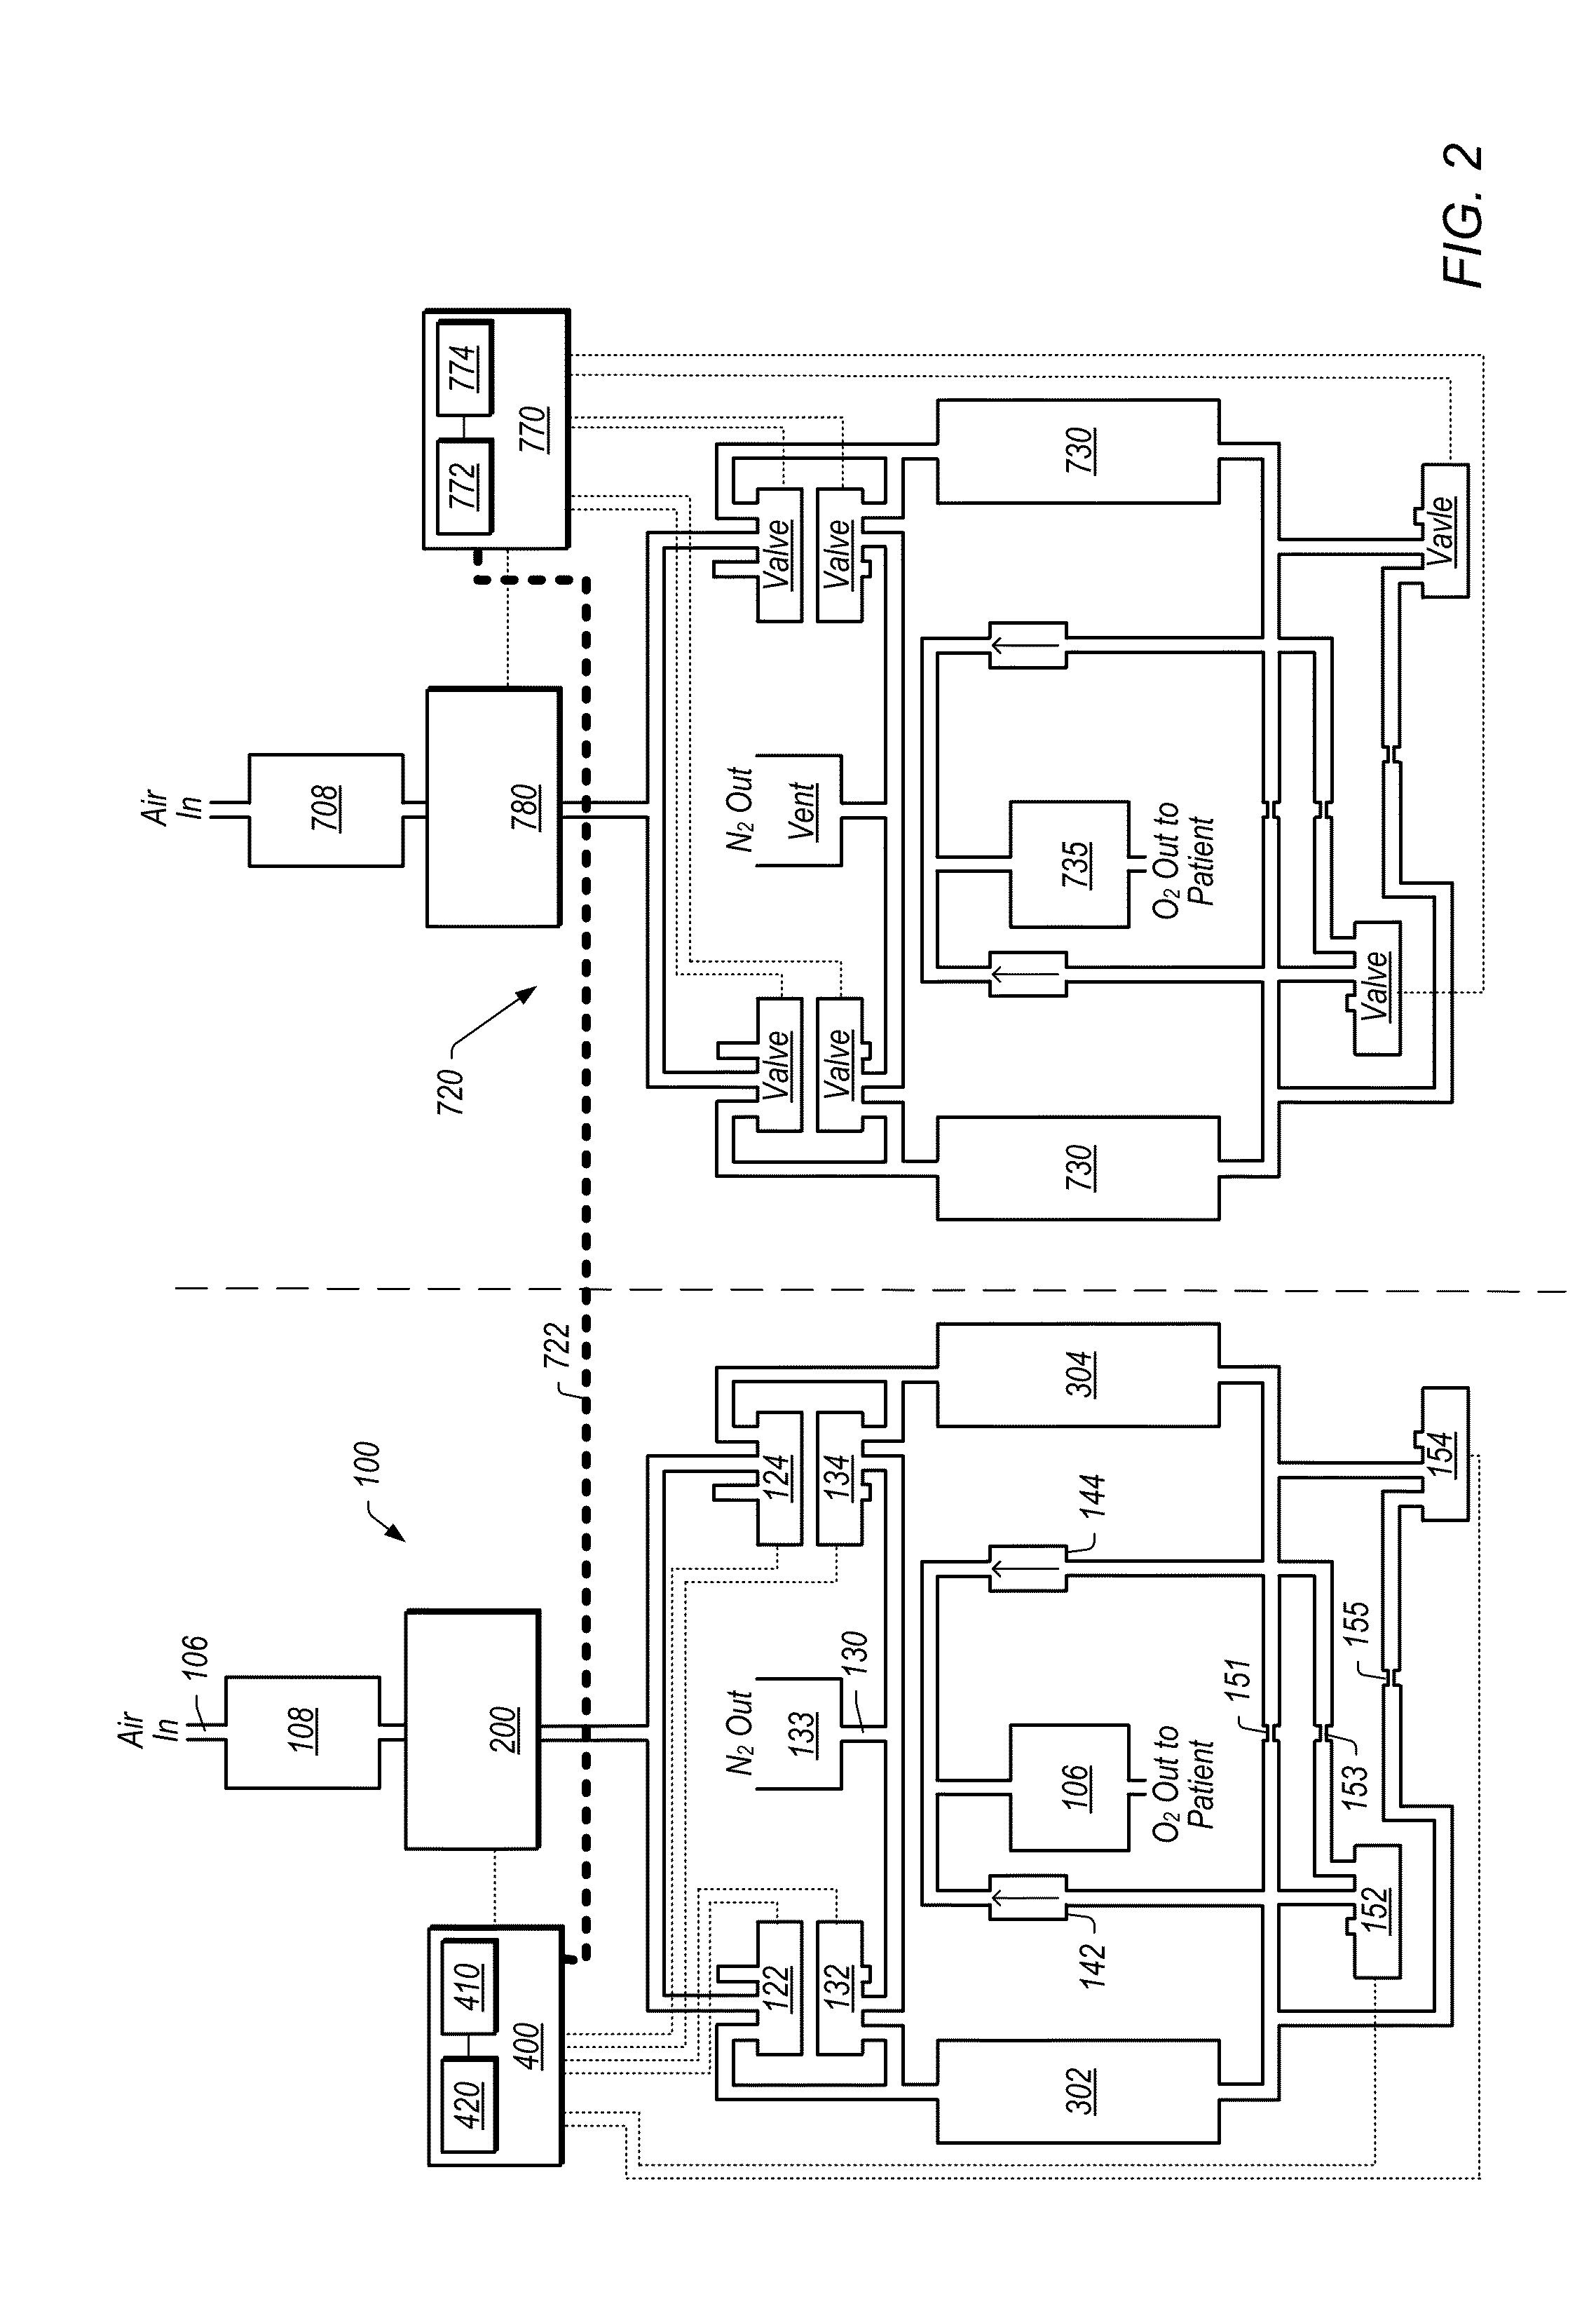 Dual oxygen concentrator systems and methods